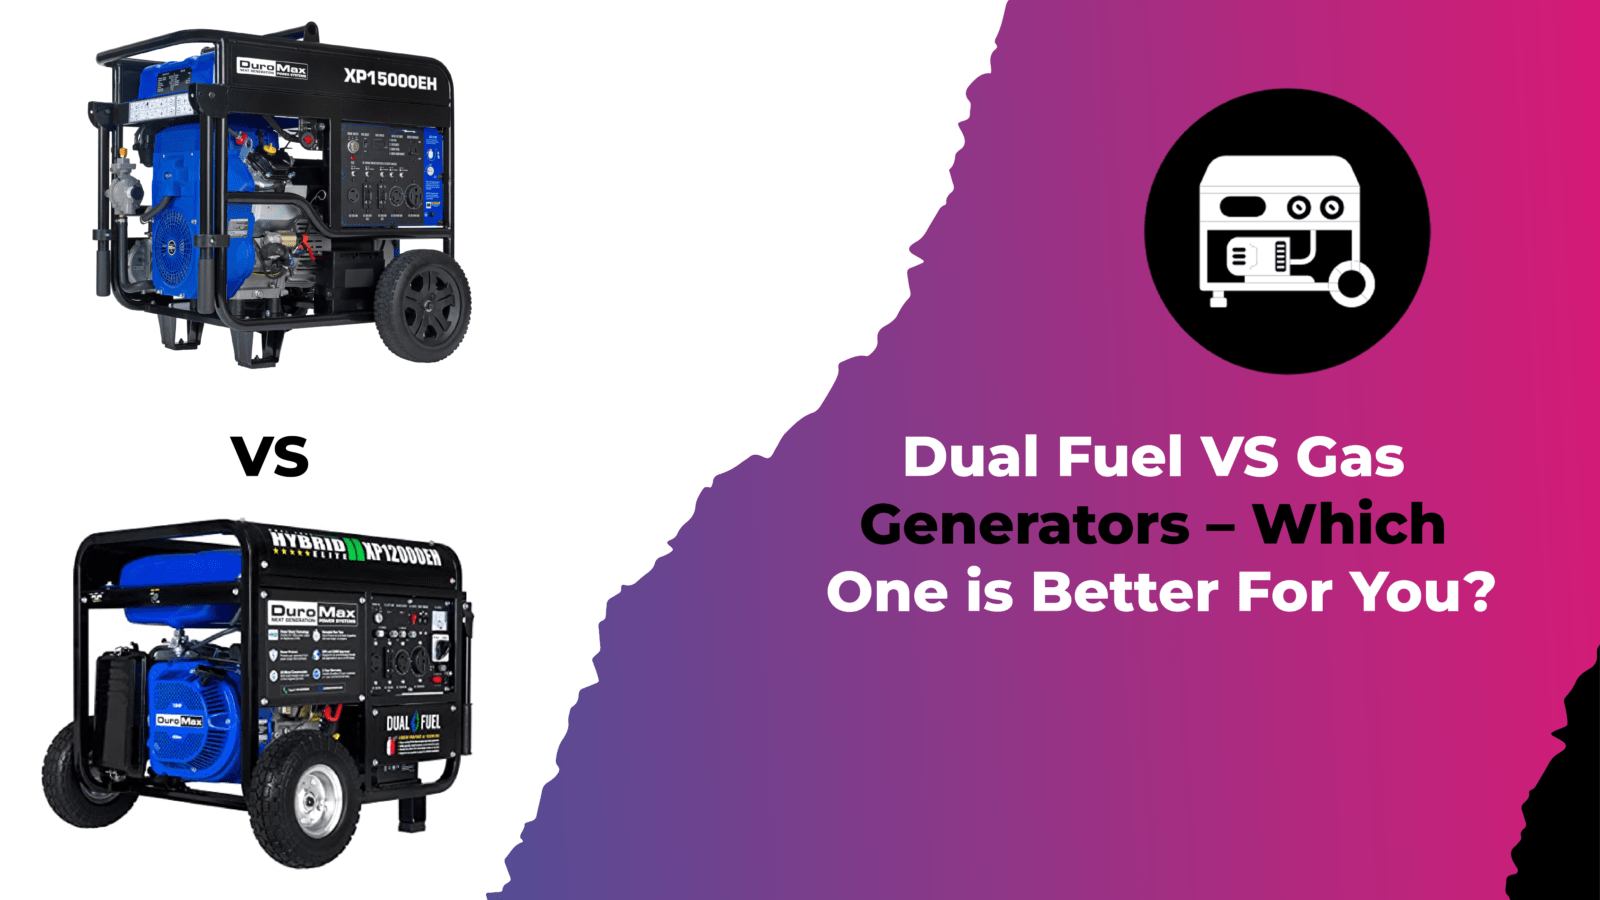 Dual Fuel VS Gas Generators – Which One is Better For You